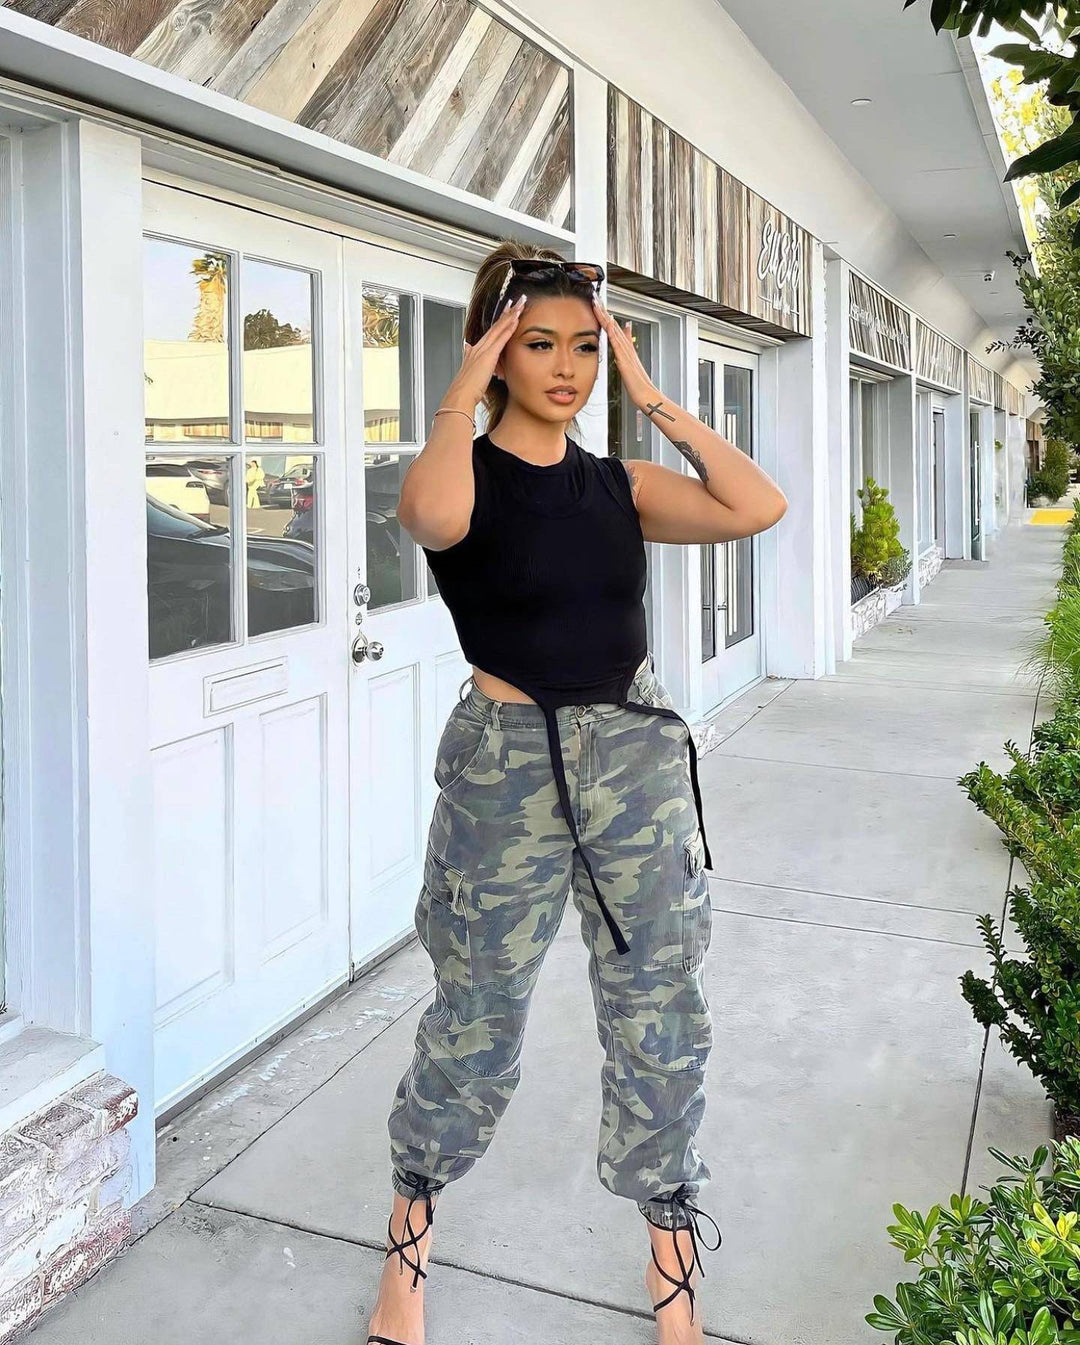 Vintage Army Cargo Pants - Style Baby OMG Fashion Boutique - Stylebabyomg - Buy - Aesthetic Baddie Outfits - Babyboo - OOTD - Shie 